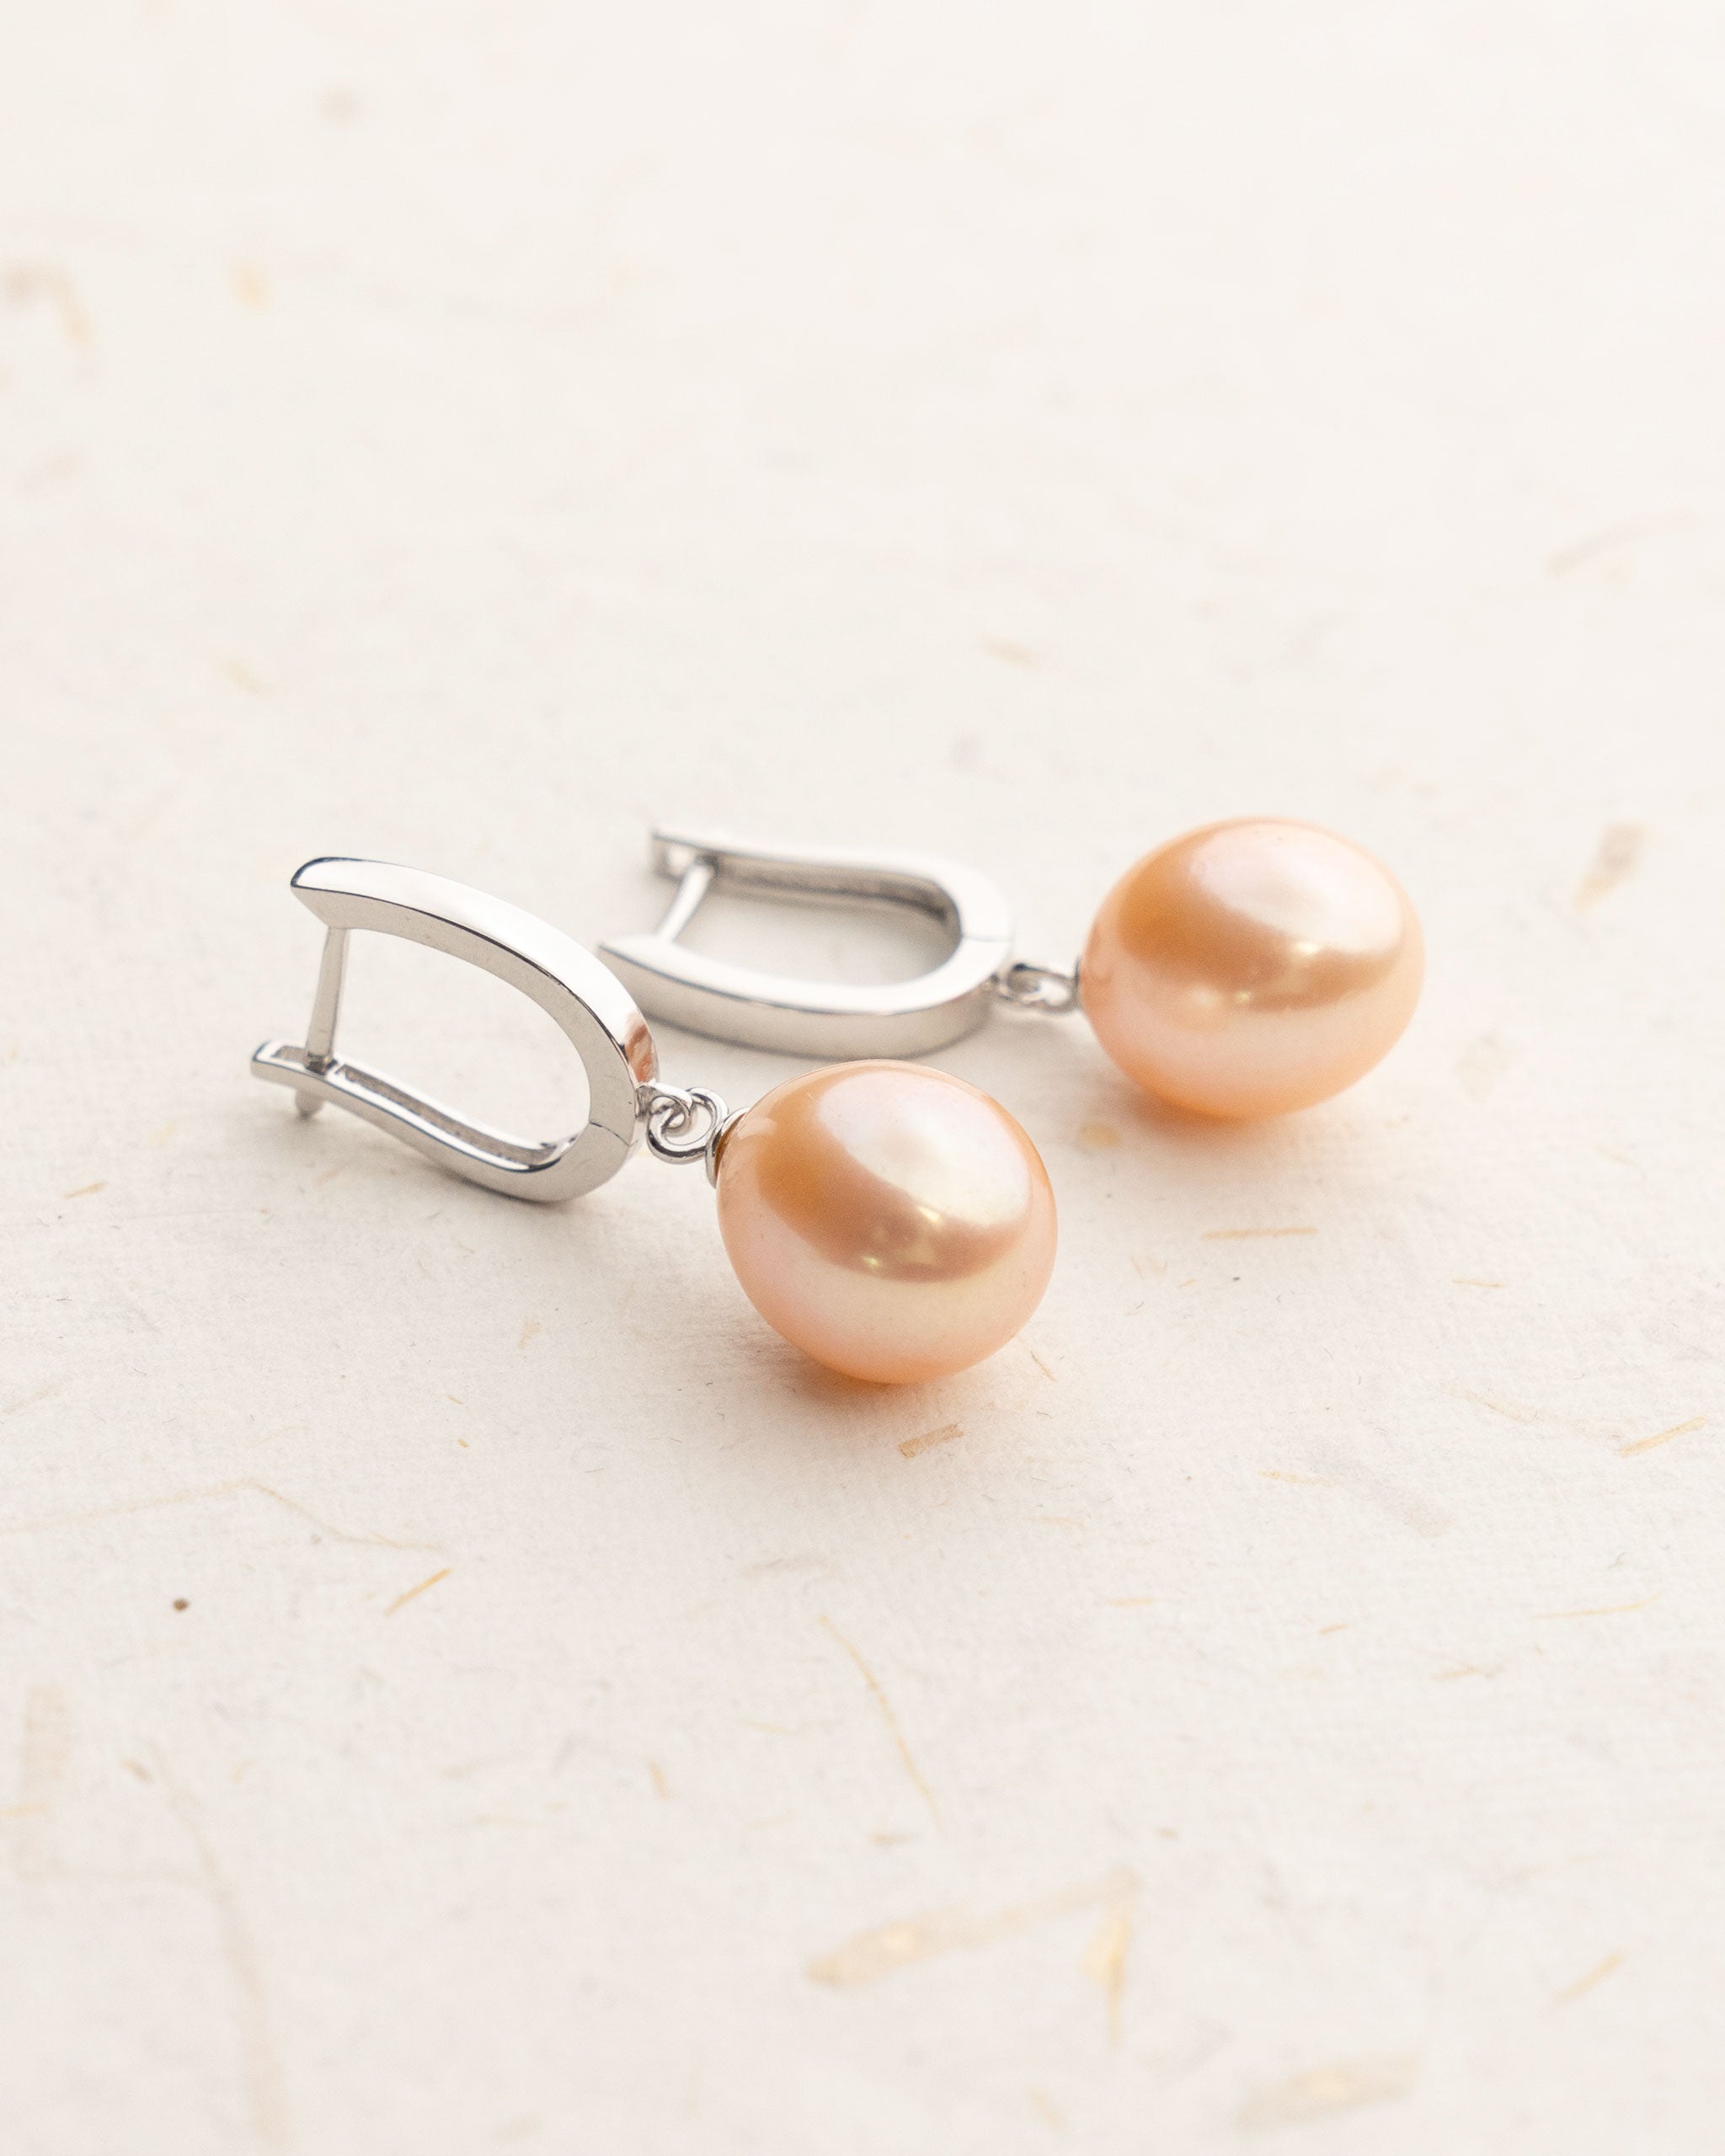 Freshwater Pearl Earrings 10-11mm Peach Drop type with Sterling Silver